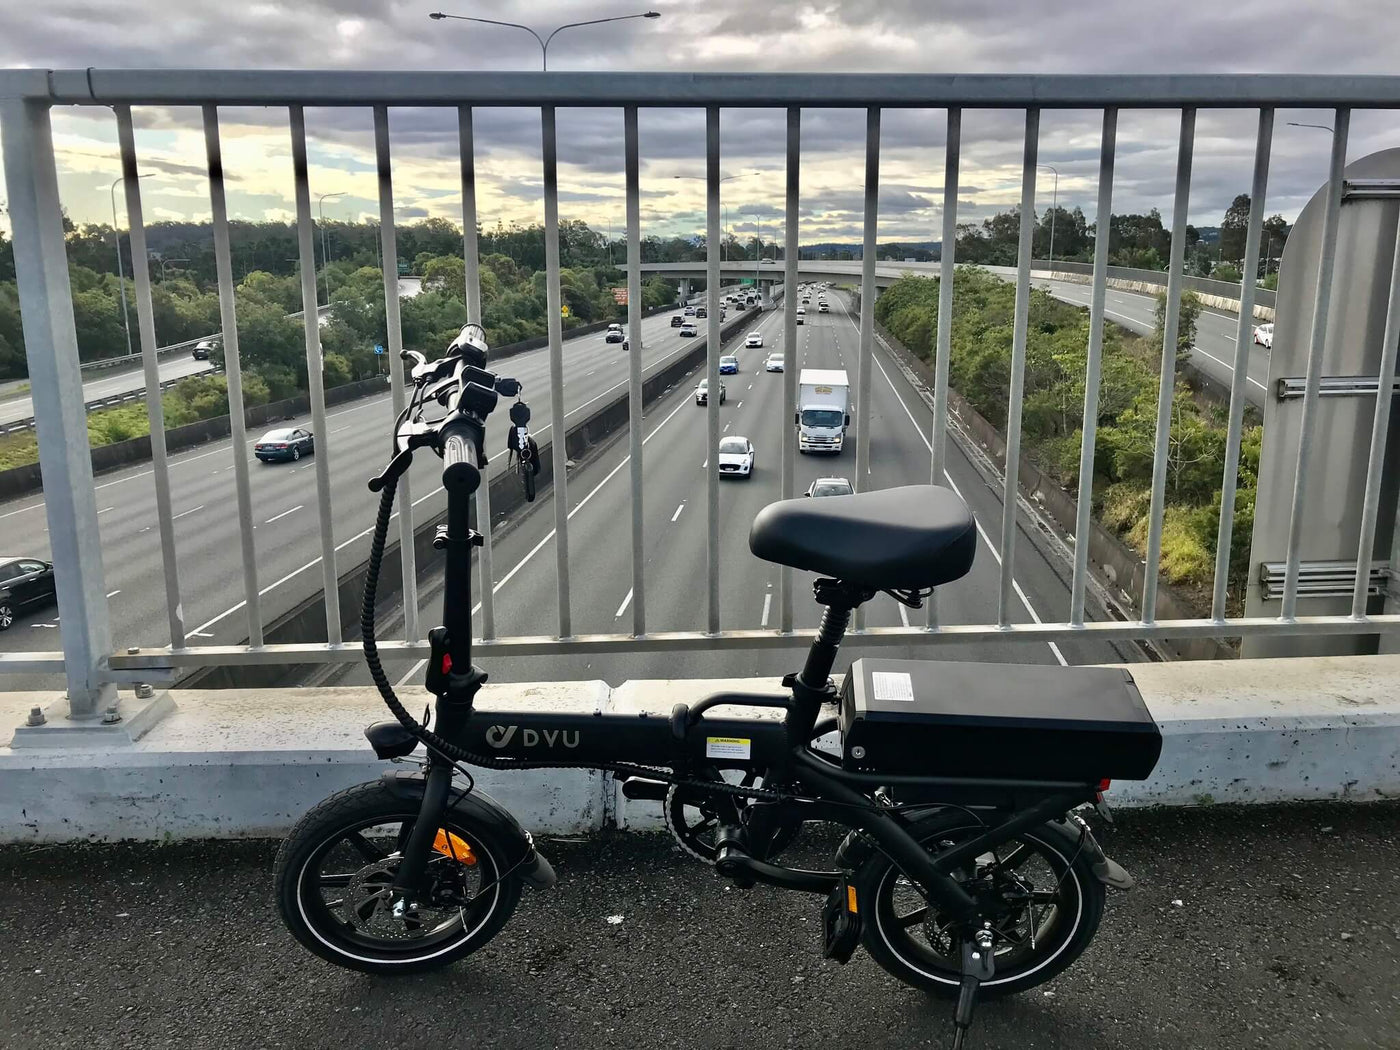 DYU A7 Electric Bike on bridge with cars in background driving on highway road